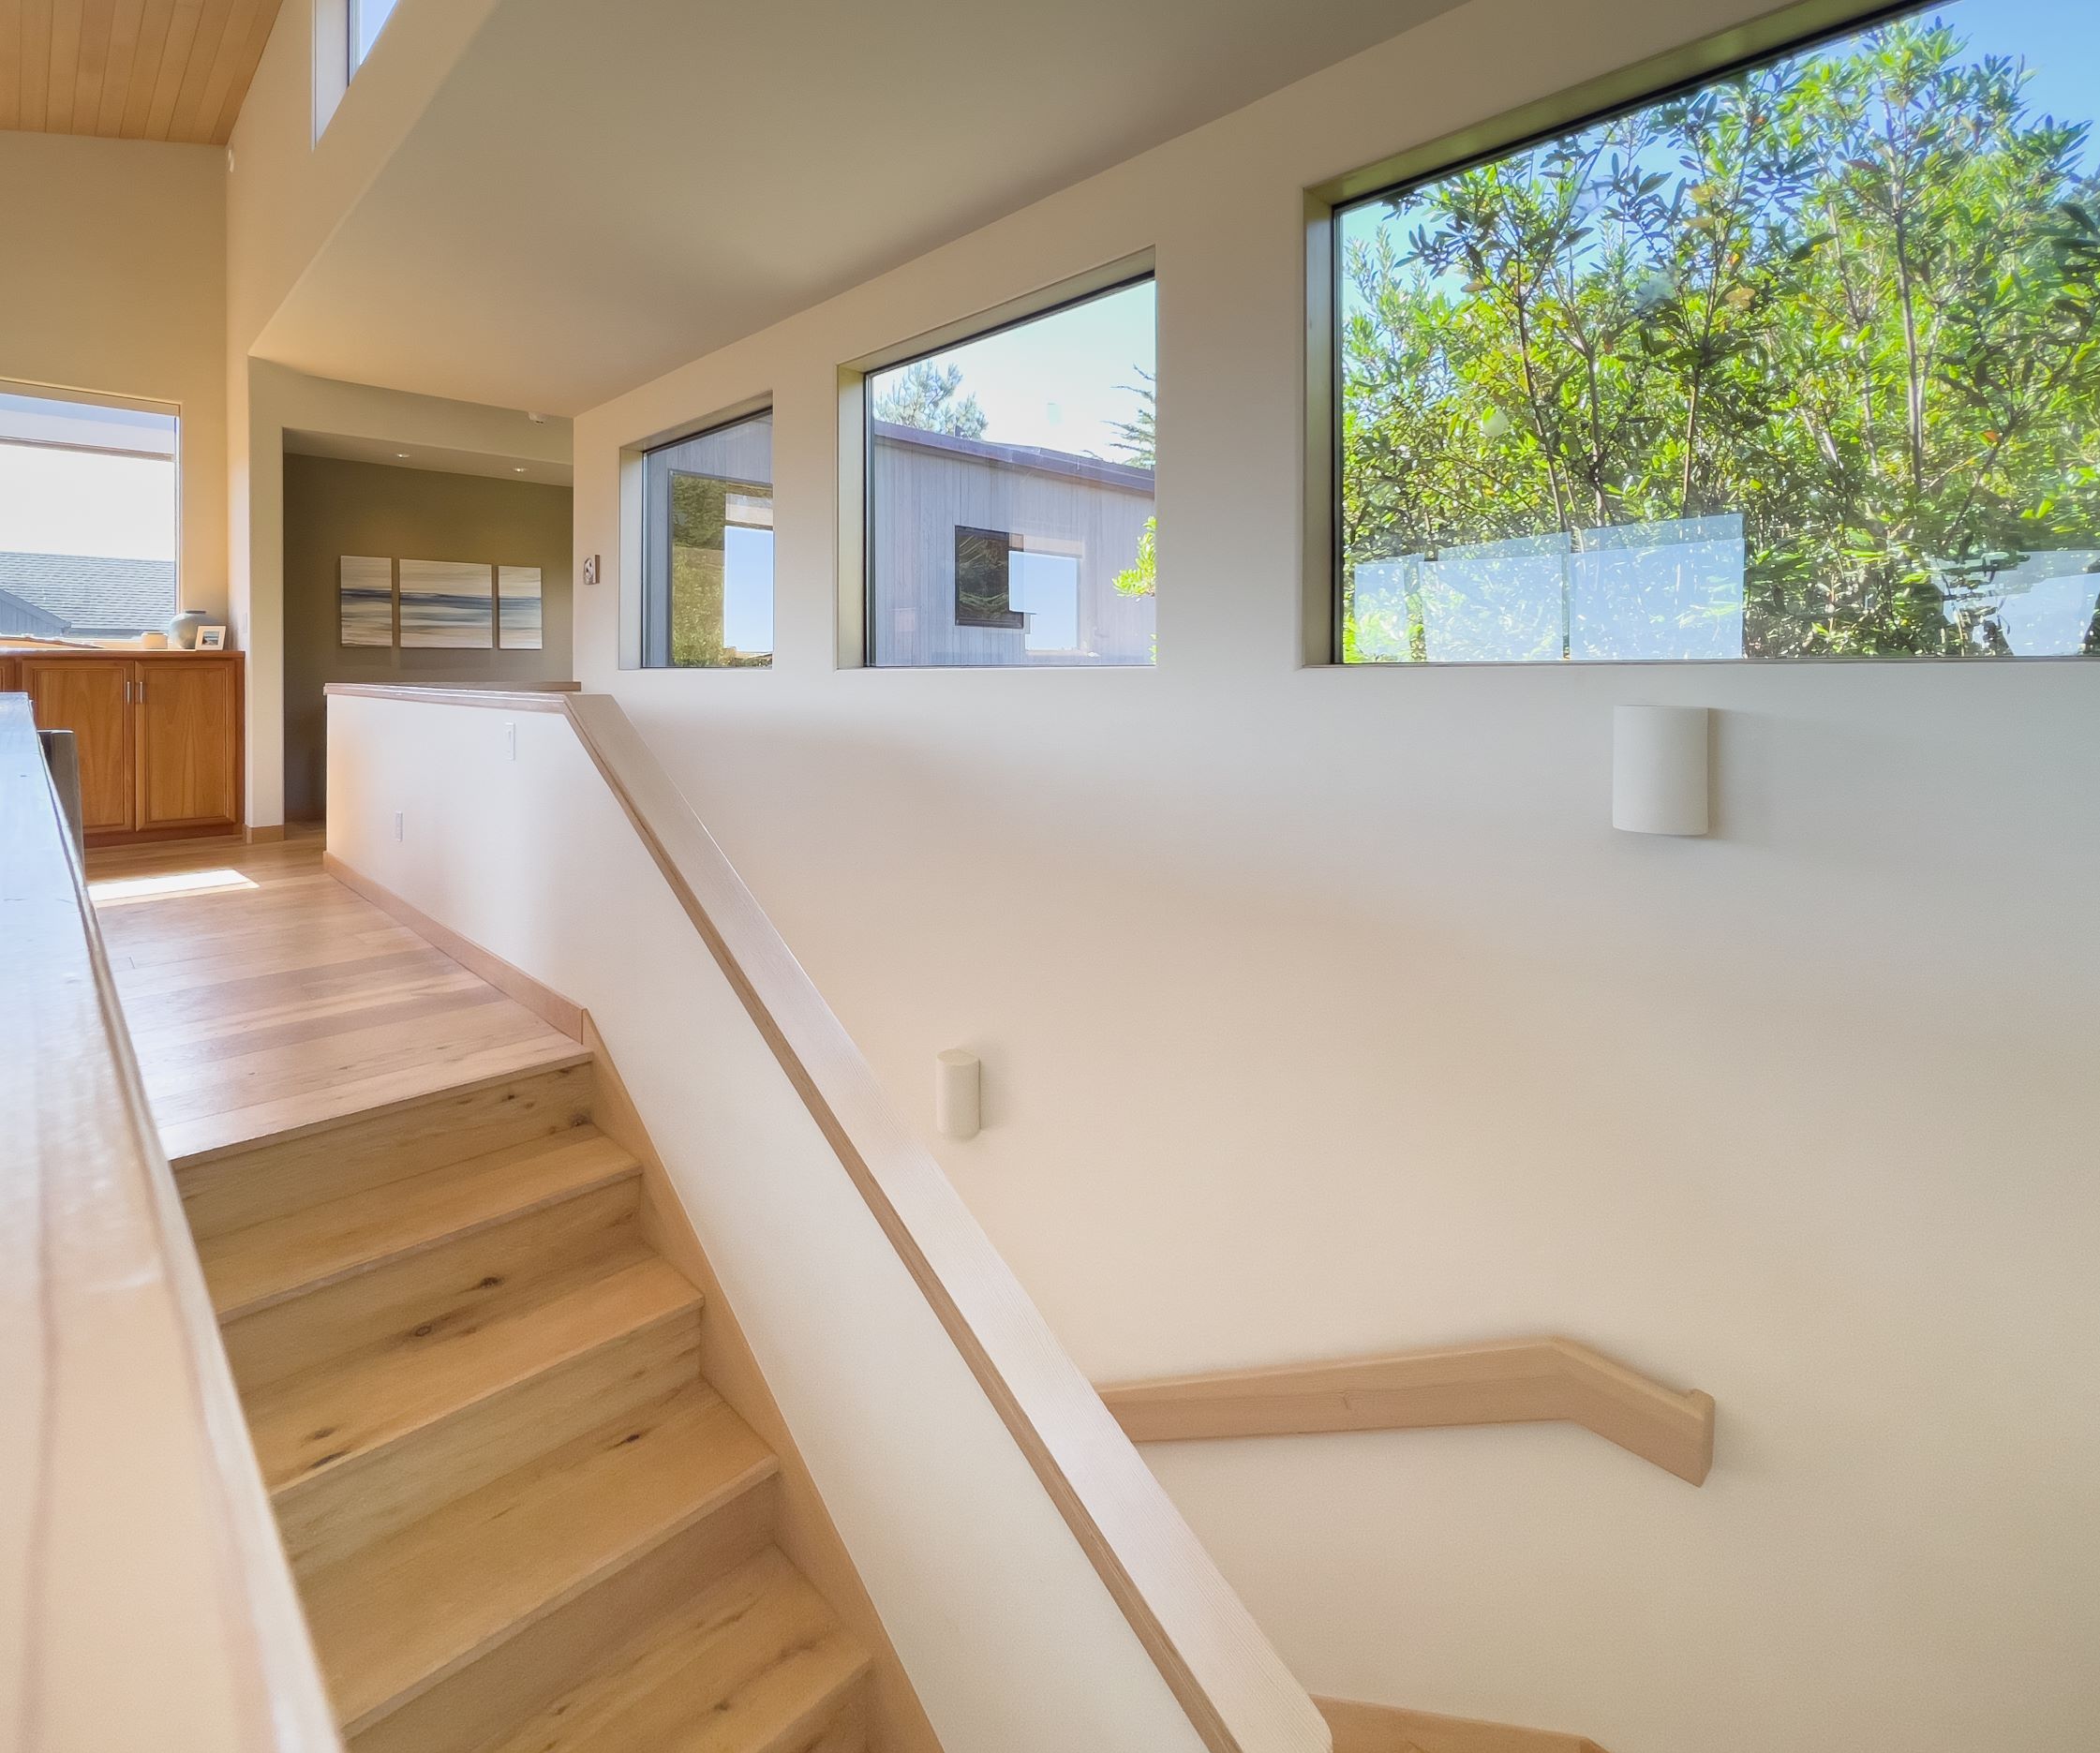 Solstice - wooden staircase with bright windows